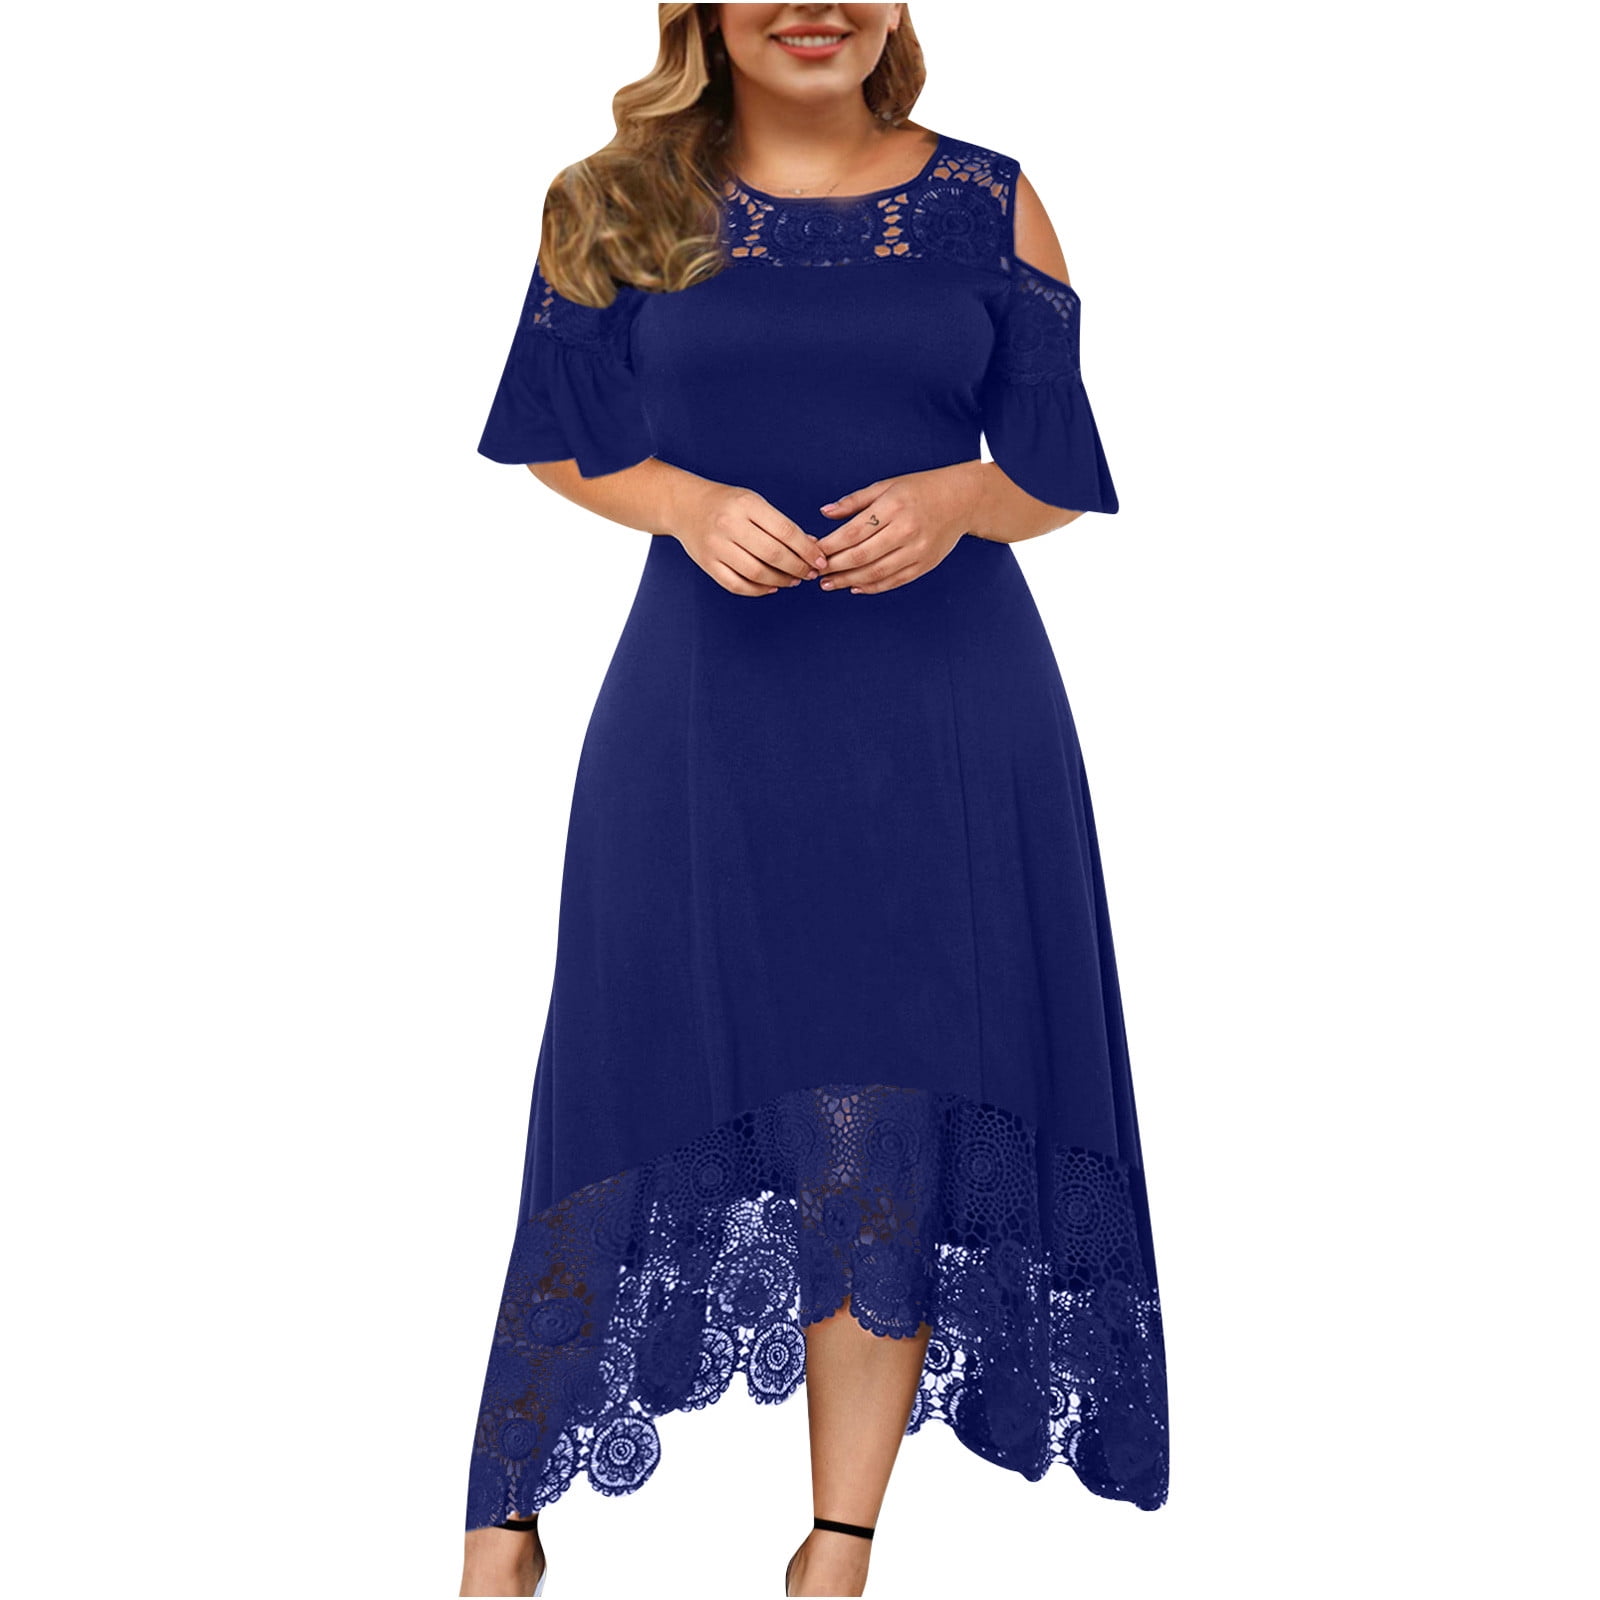 Mchoice Summer Plus Size Dress for Women Sexy Short Sleeve Strapless ...